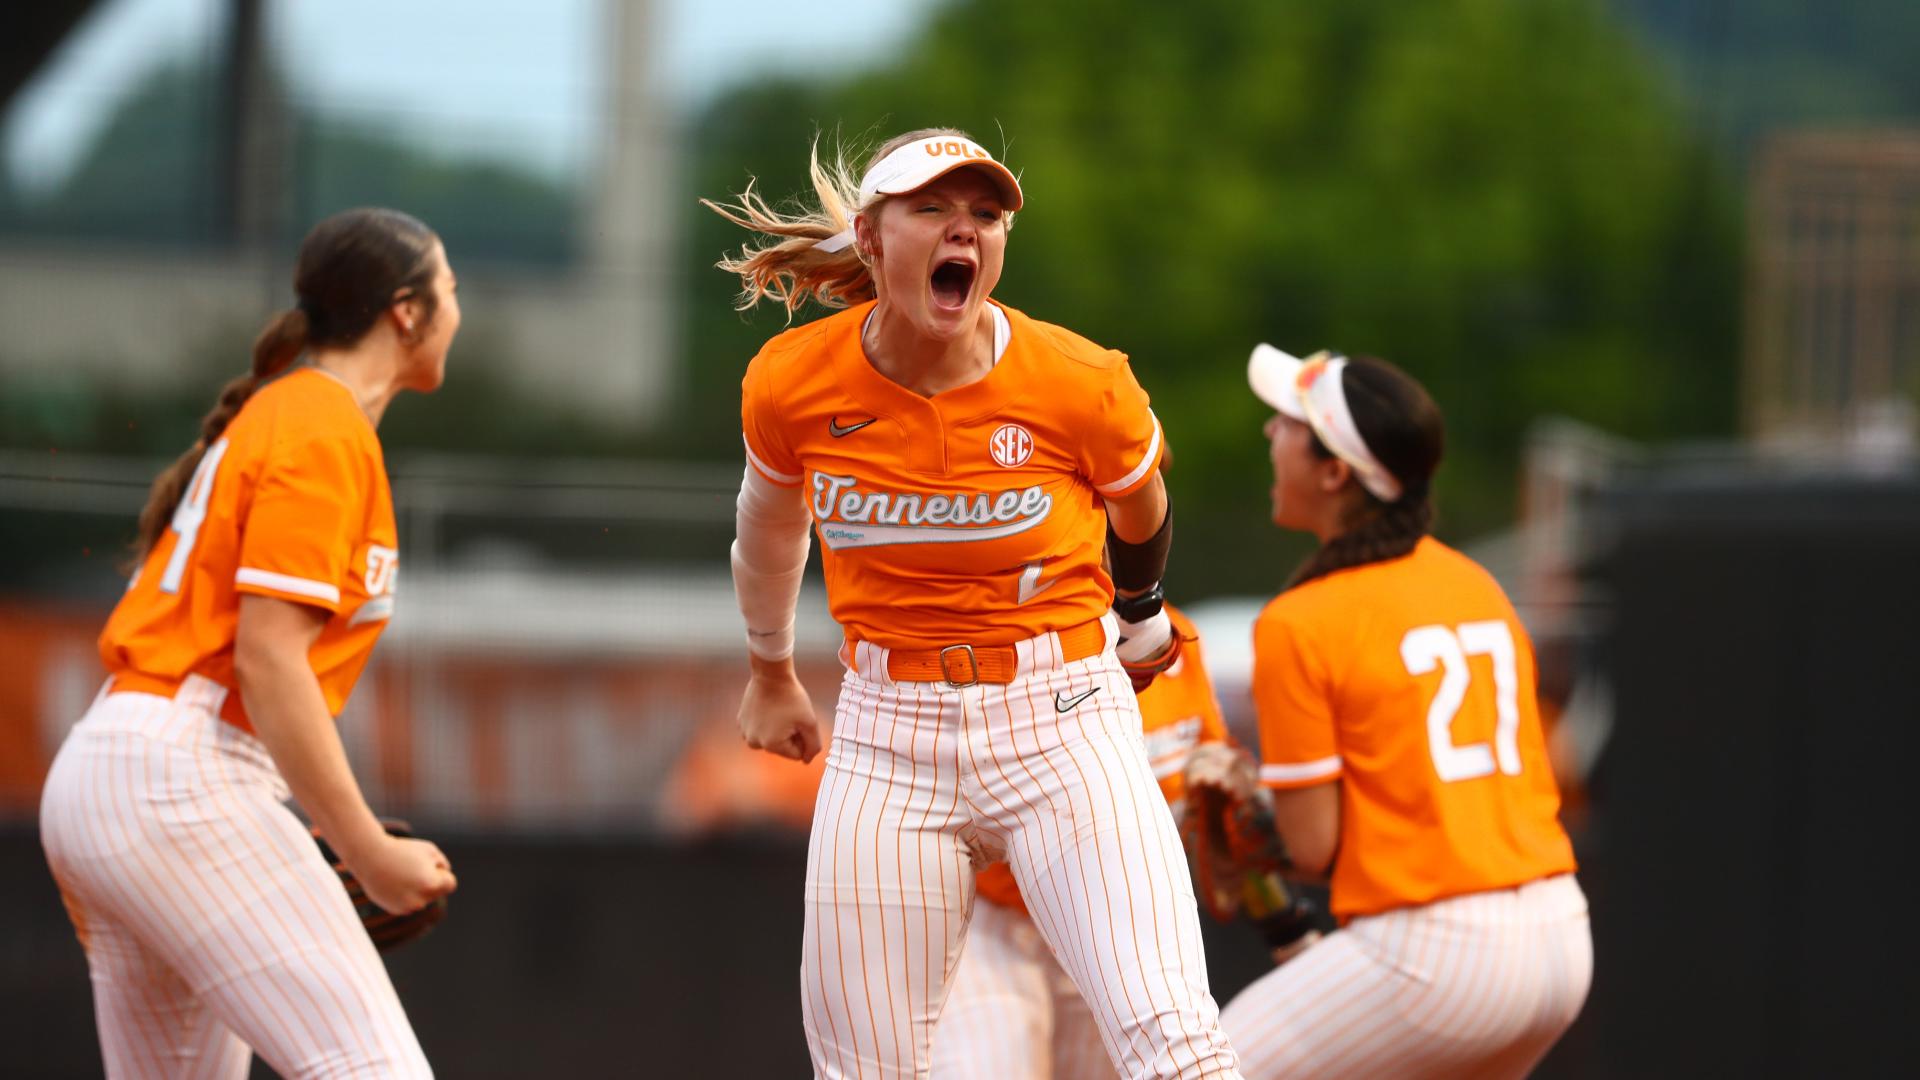 The University of Tennessee clinched the title with a win Friday night against Kentucky.